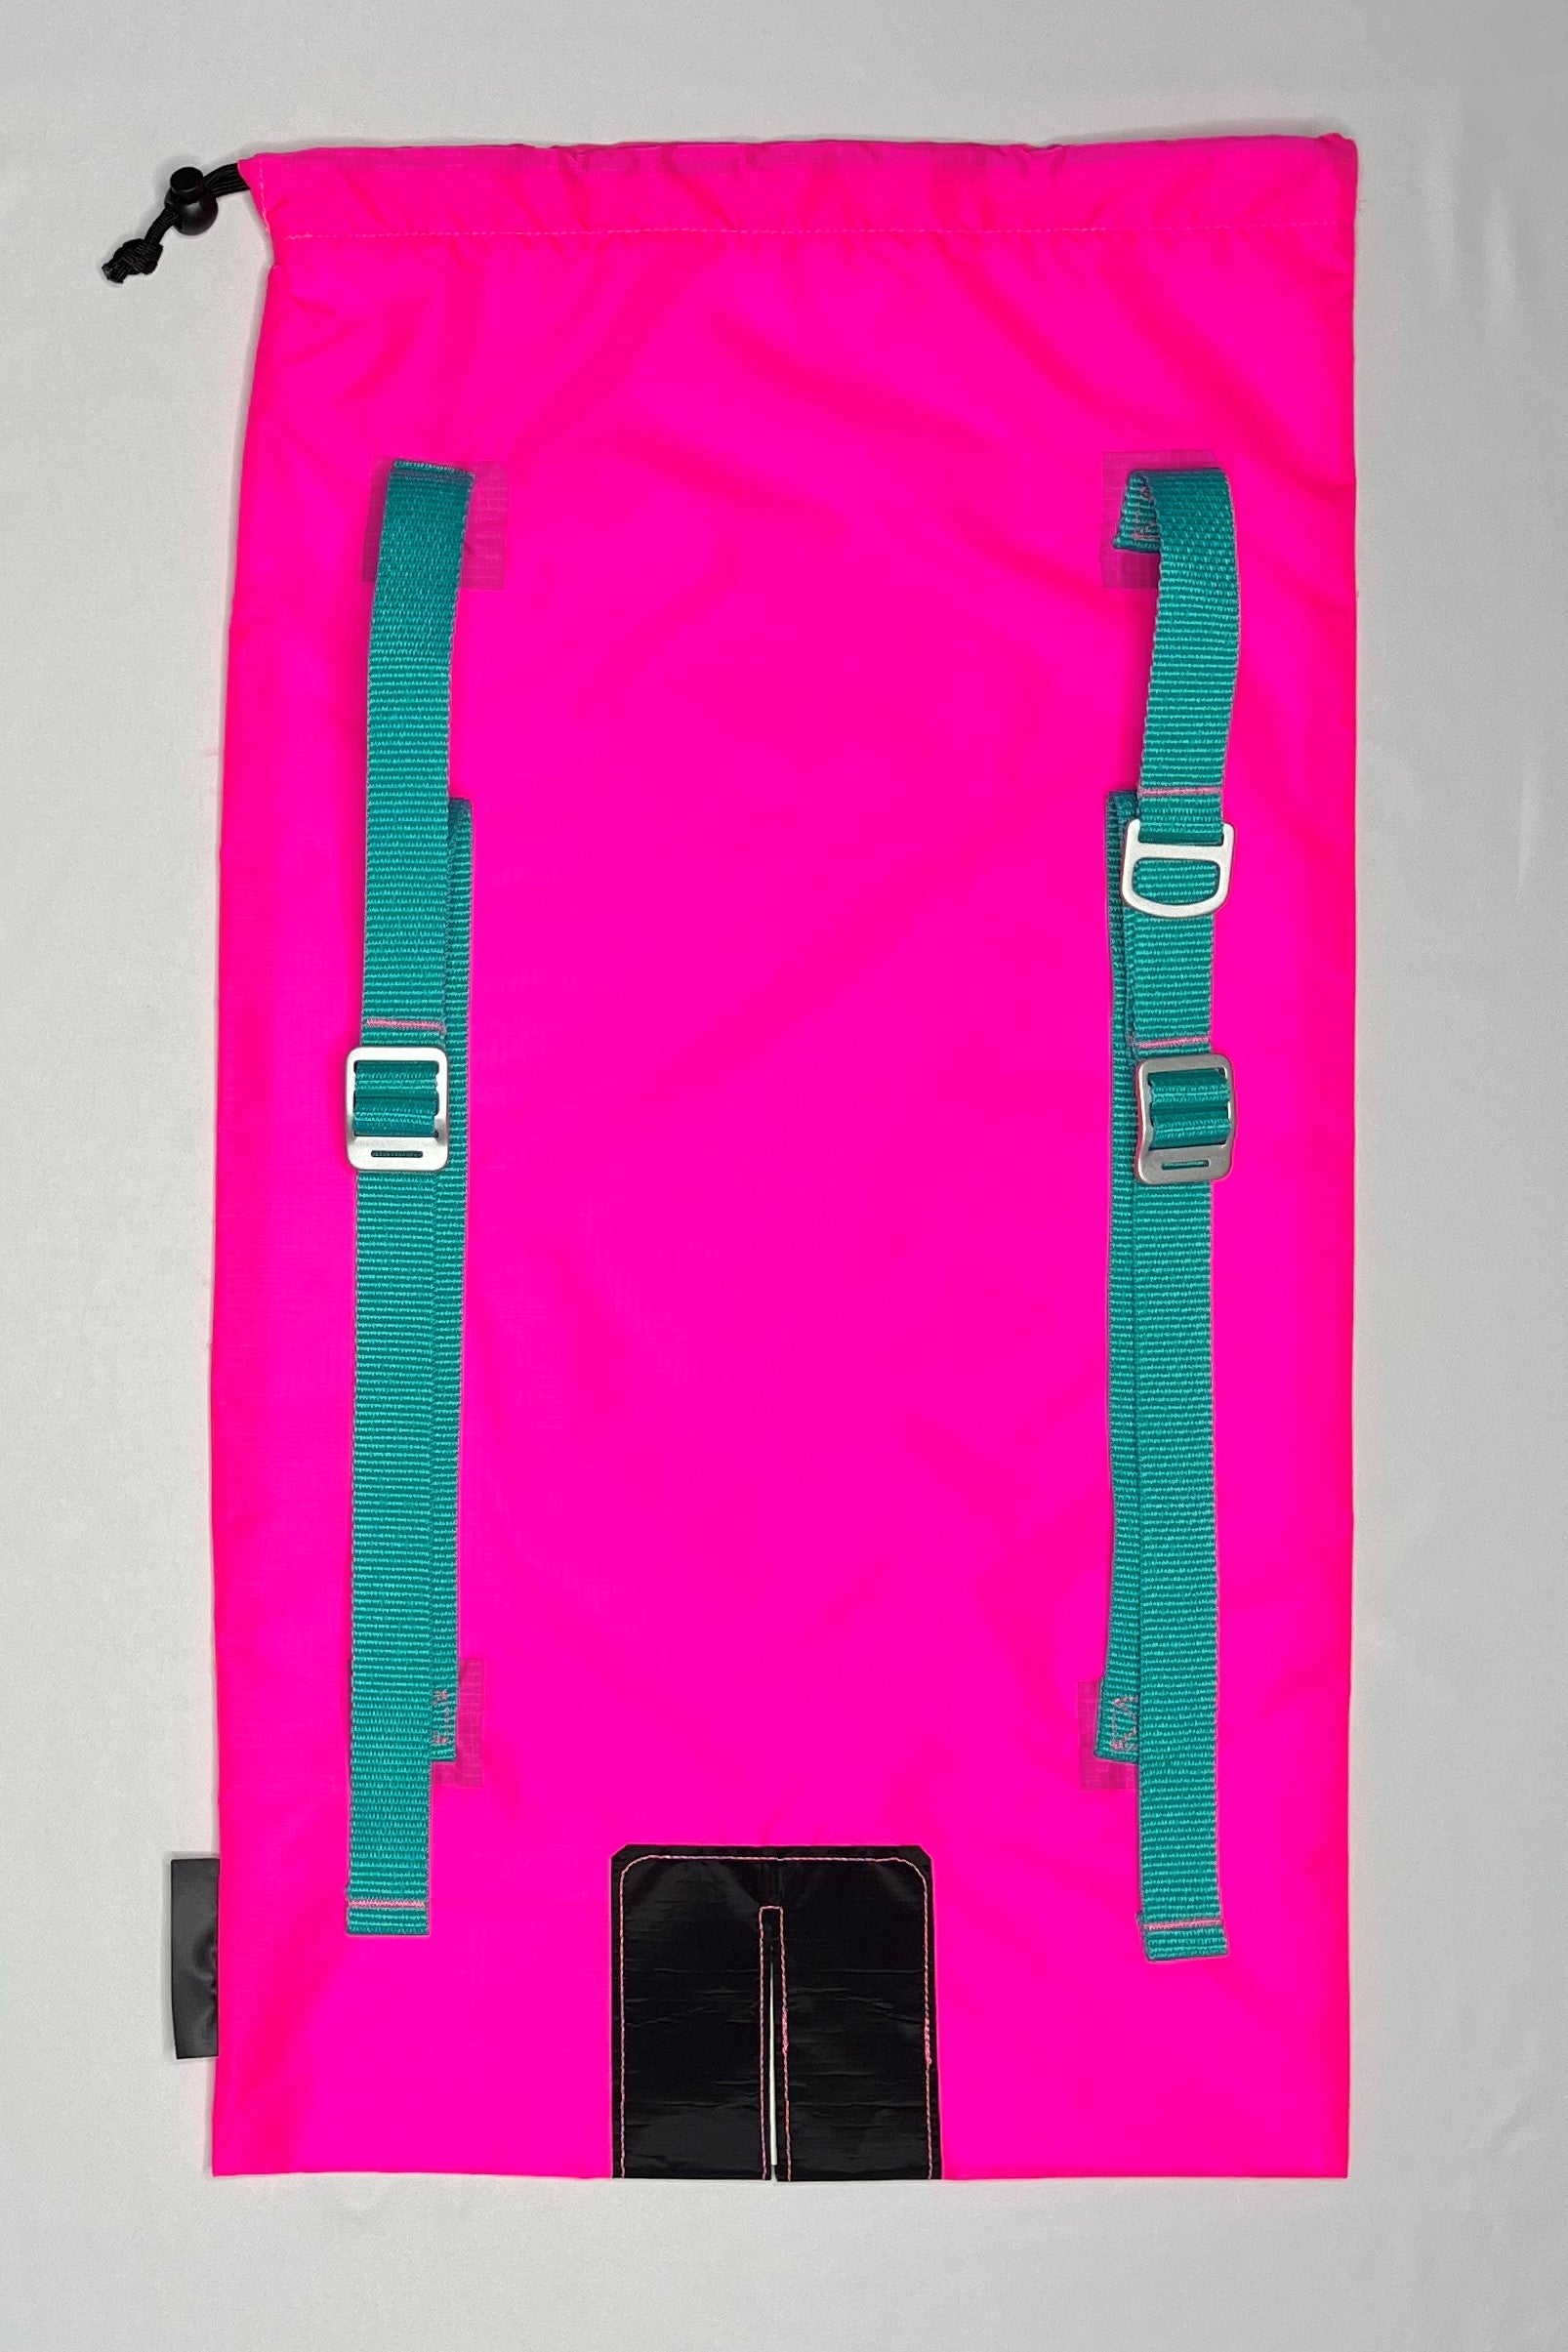 Back image of neon Pink Ski pack with Teal straps, and aluminum strap adjusters and d-ring.